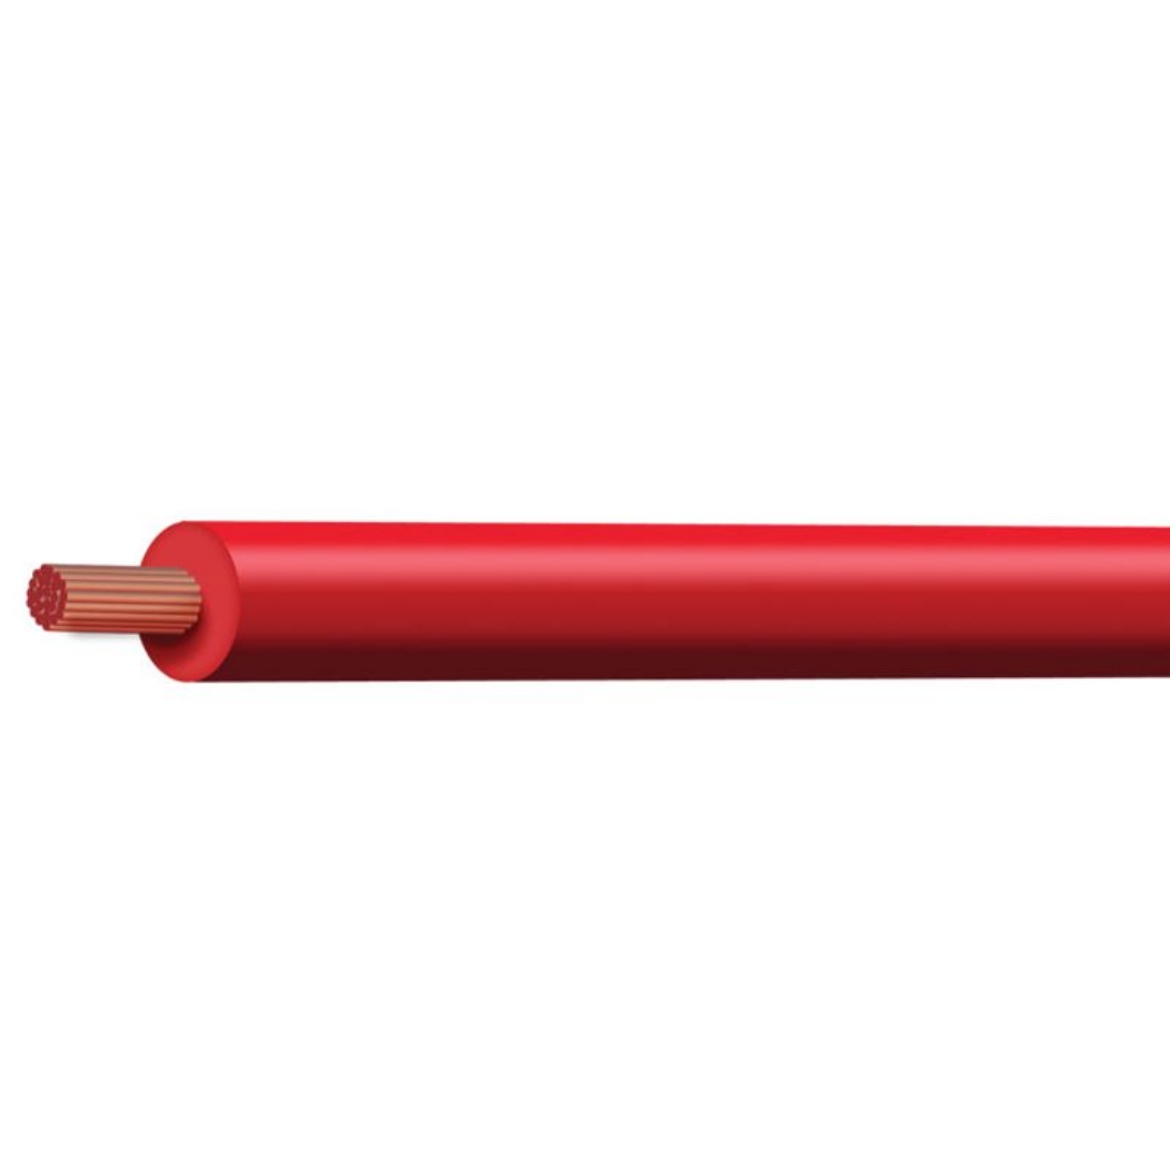 Picture of TYCAB SINGLE CORE CABLE BATTERY 00 B & S CROSS SECT 64MM SQ RATING 370A RED - 30M ROLL